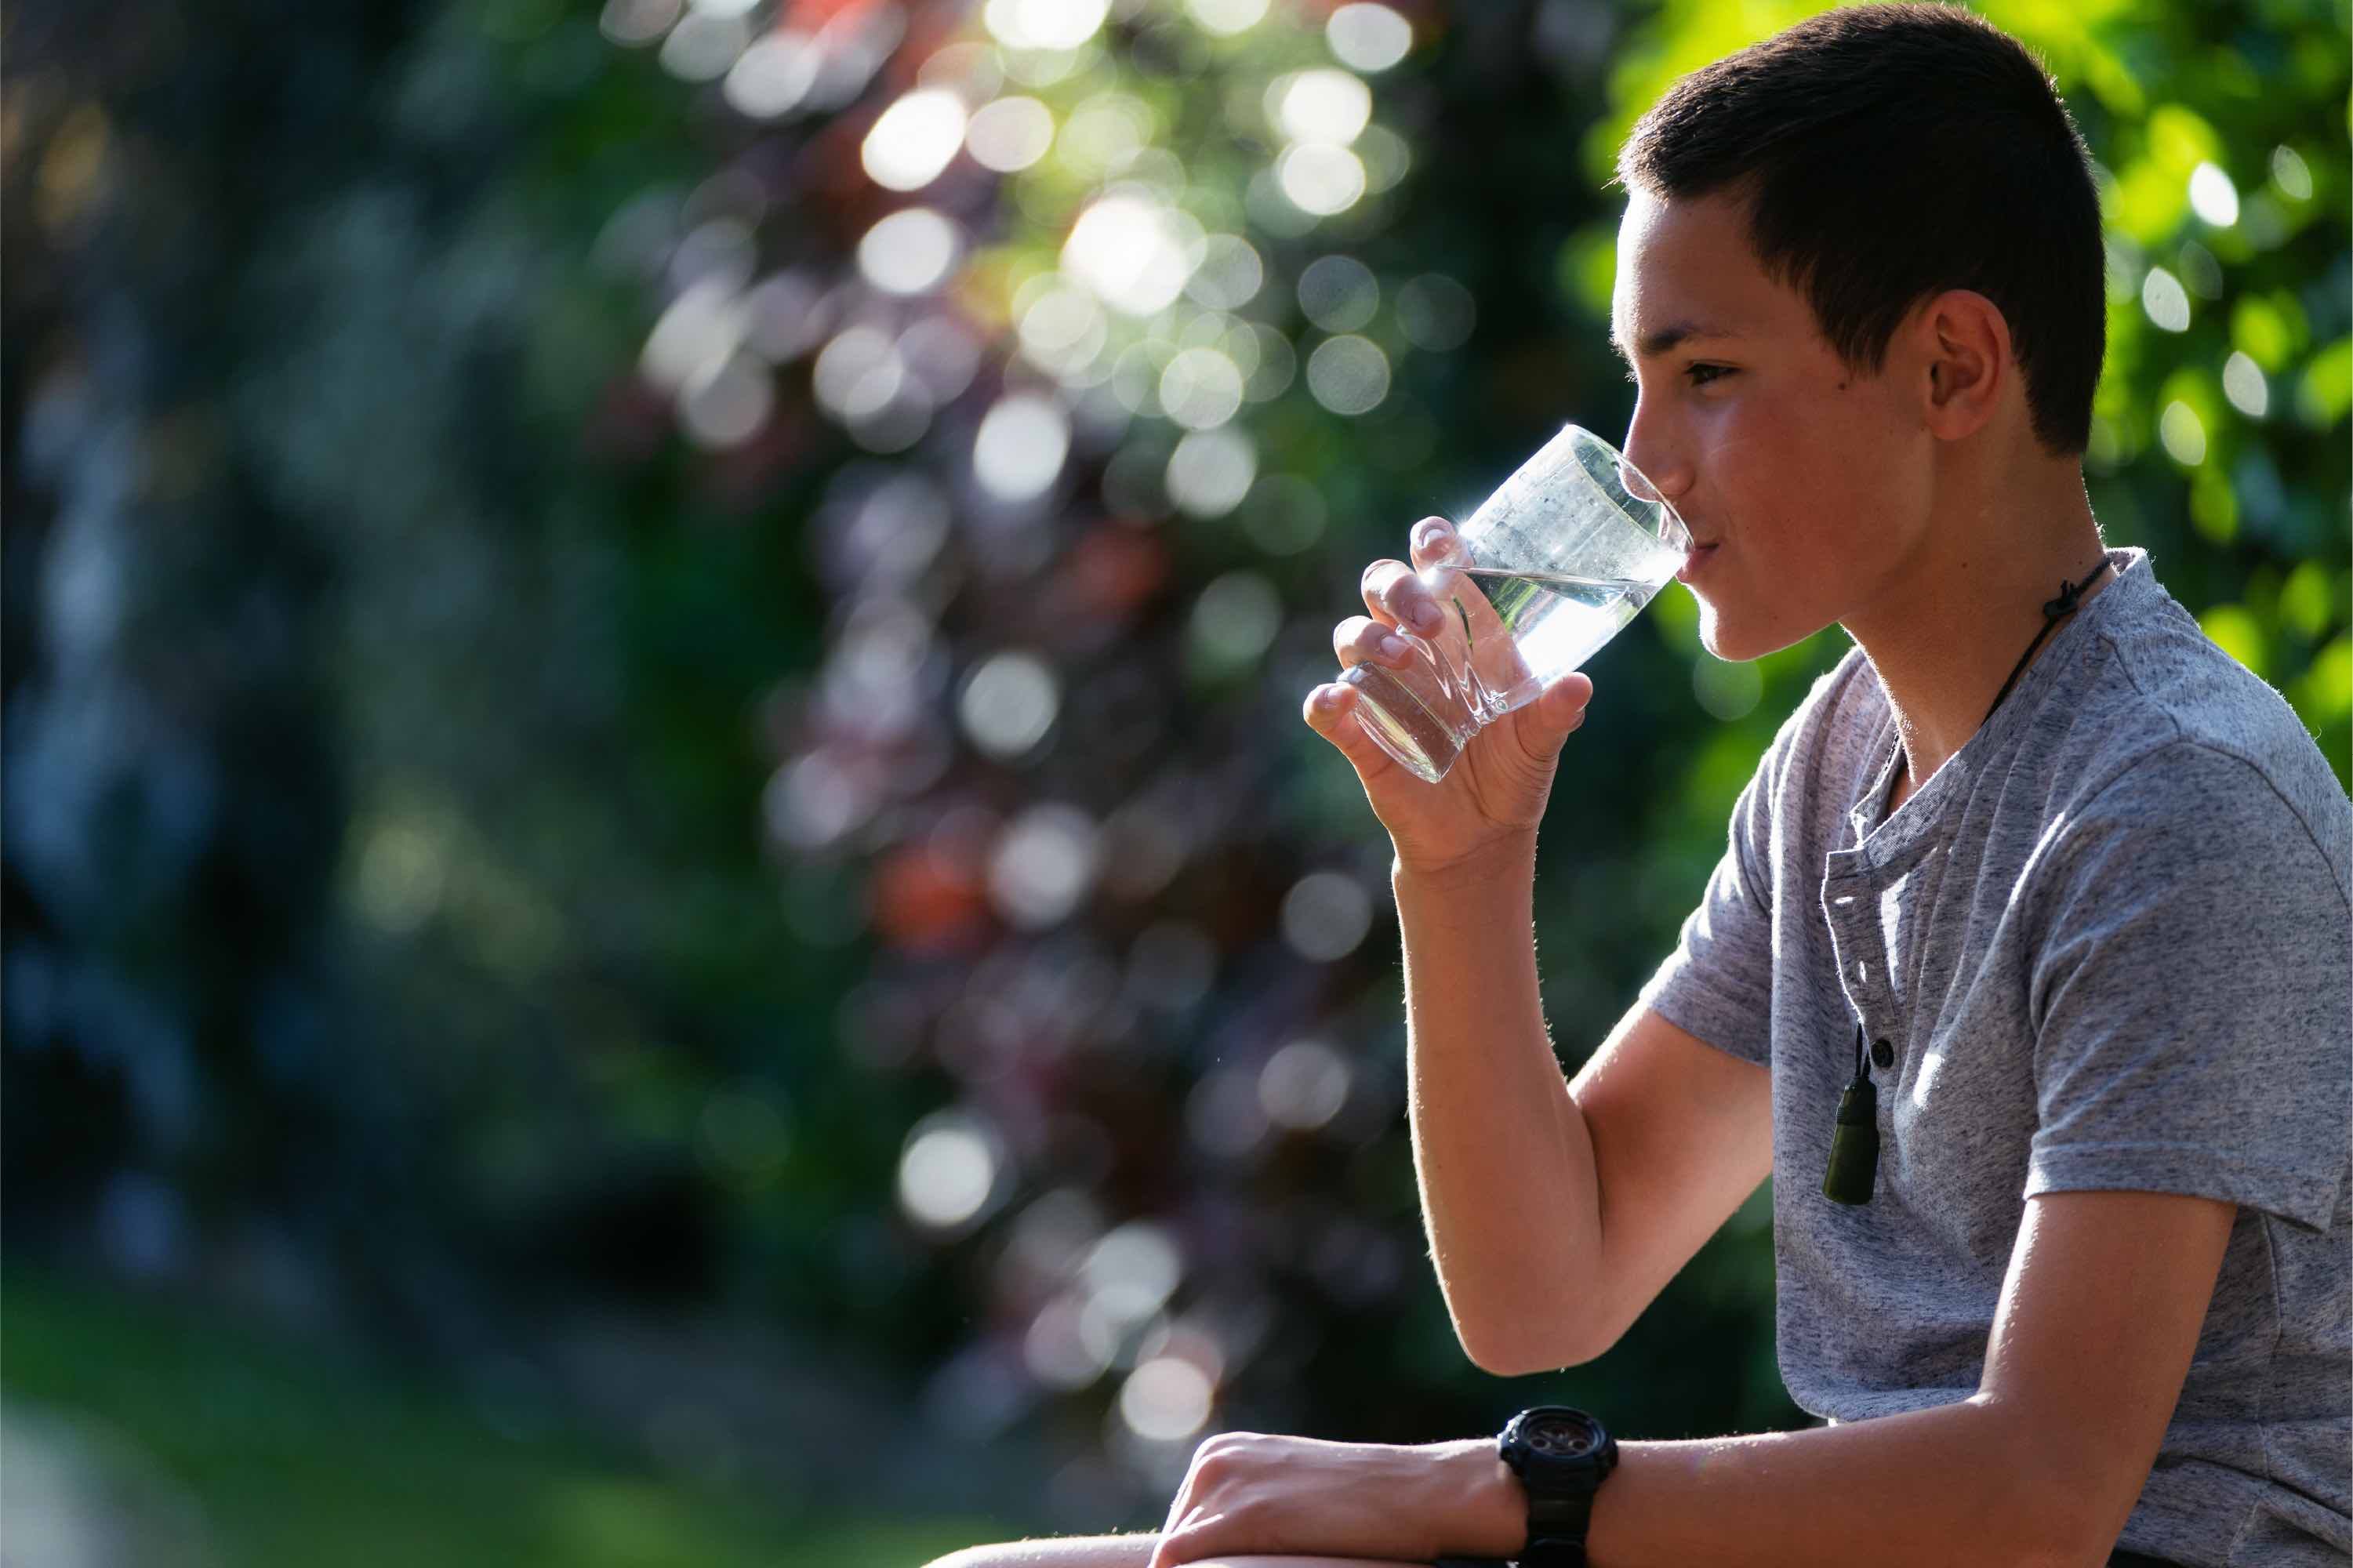 A boy sitting outside drinking from a glass of water